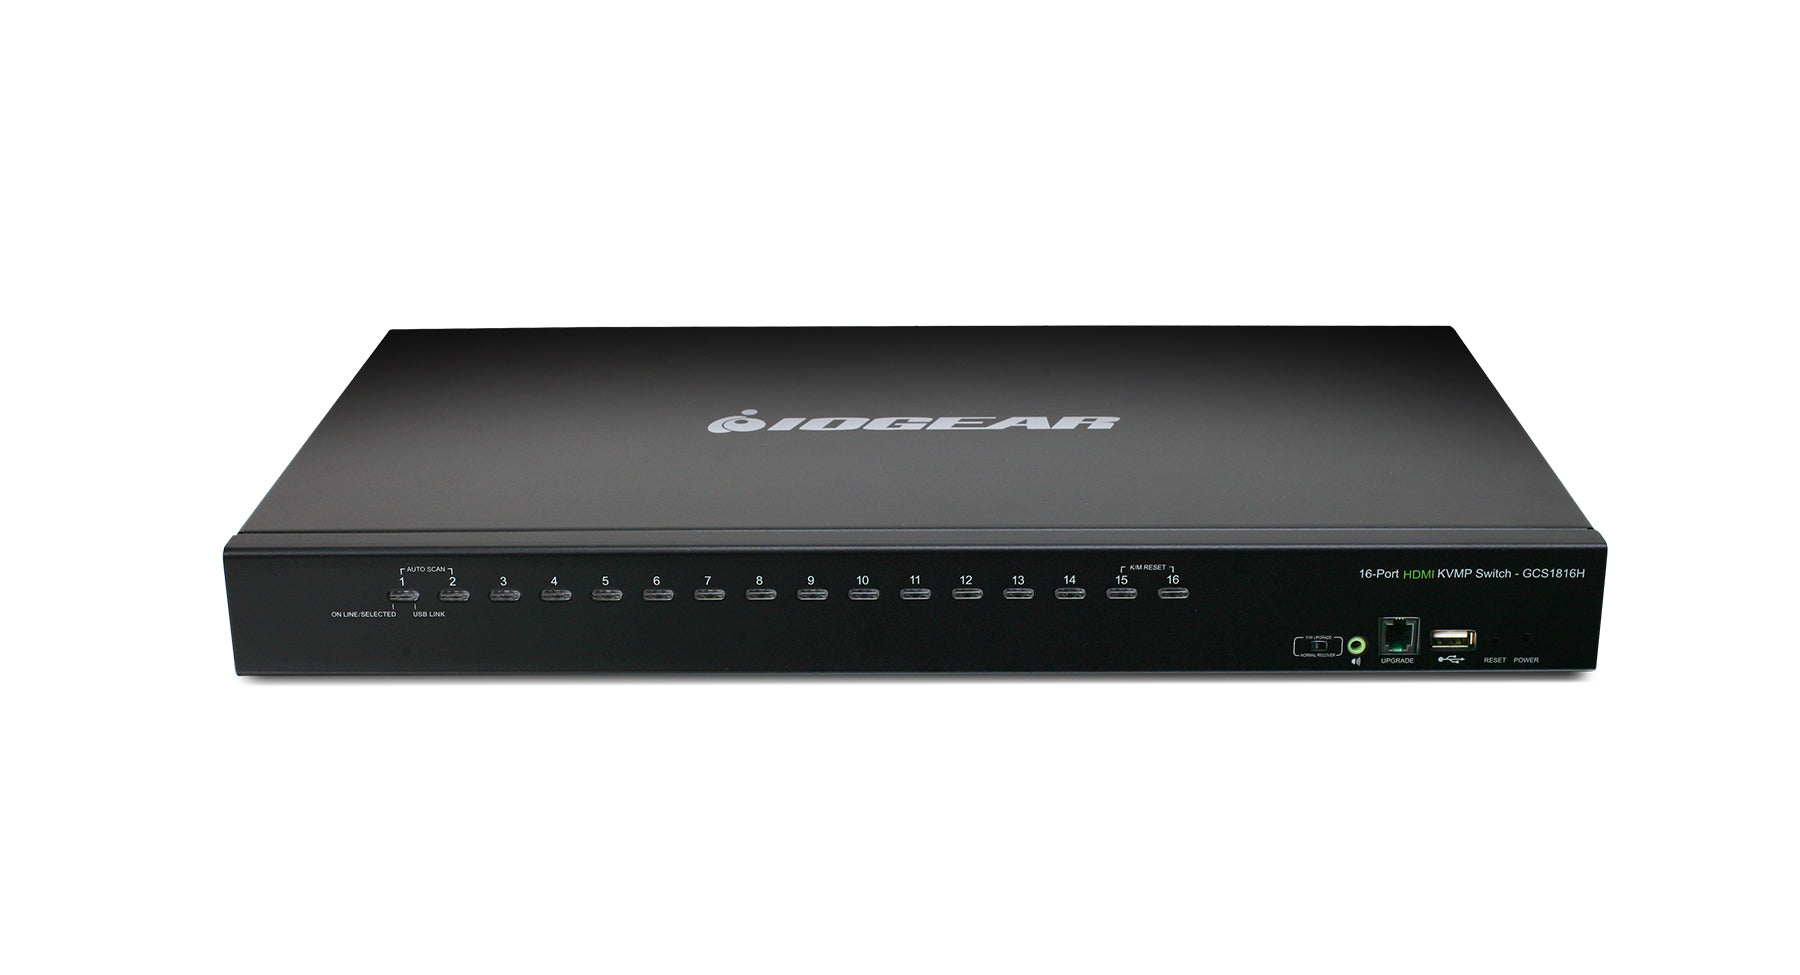 16-Port USB HDMI KVMP Switch with USB Cable Sets